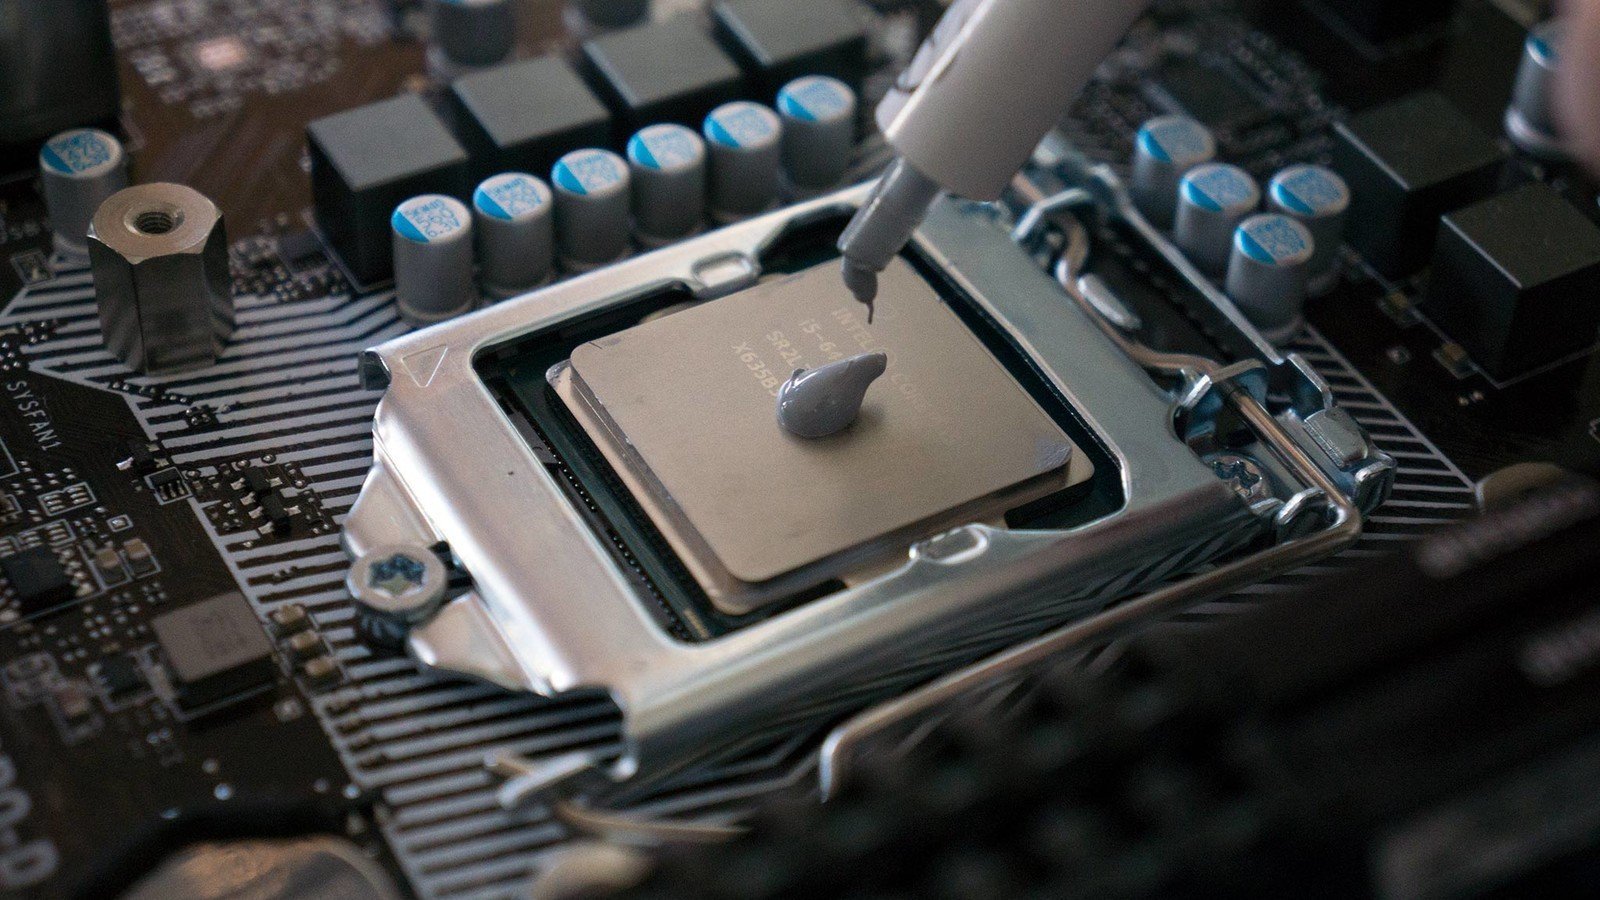 How to Apply New Thermal Paste to CPU CyberPowerPC